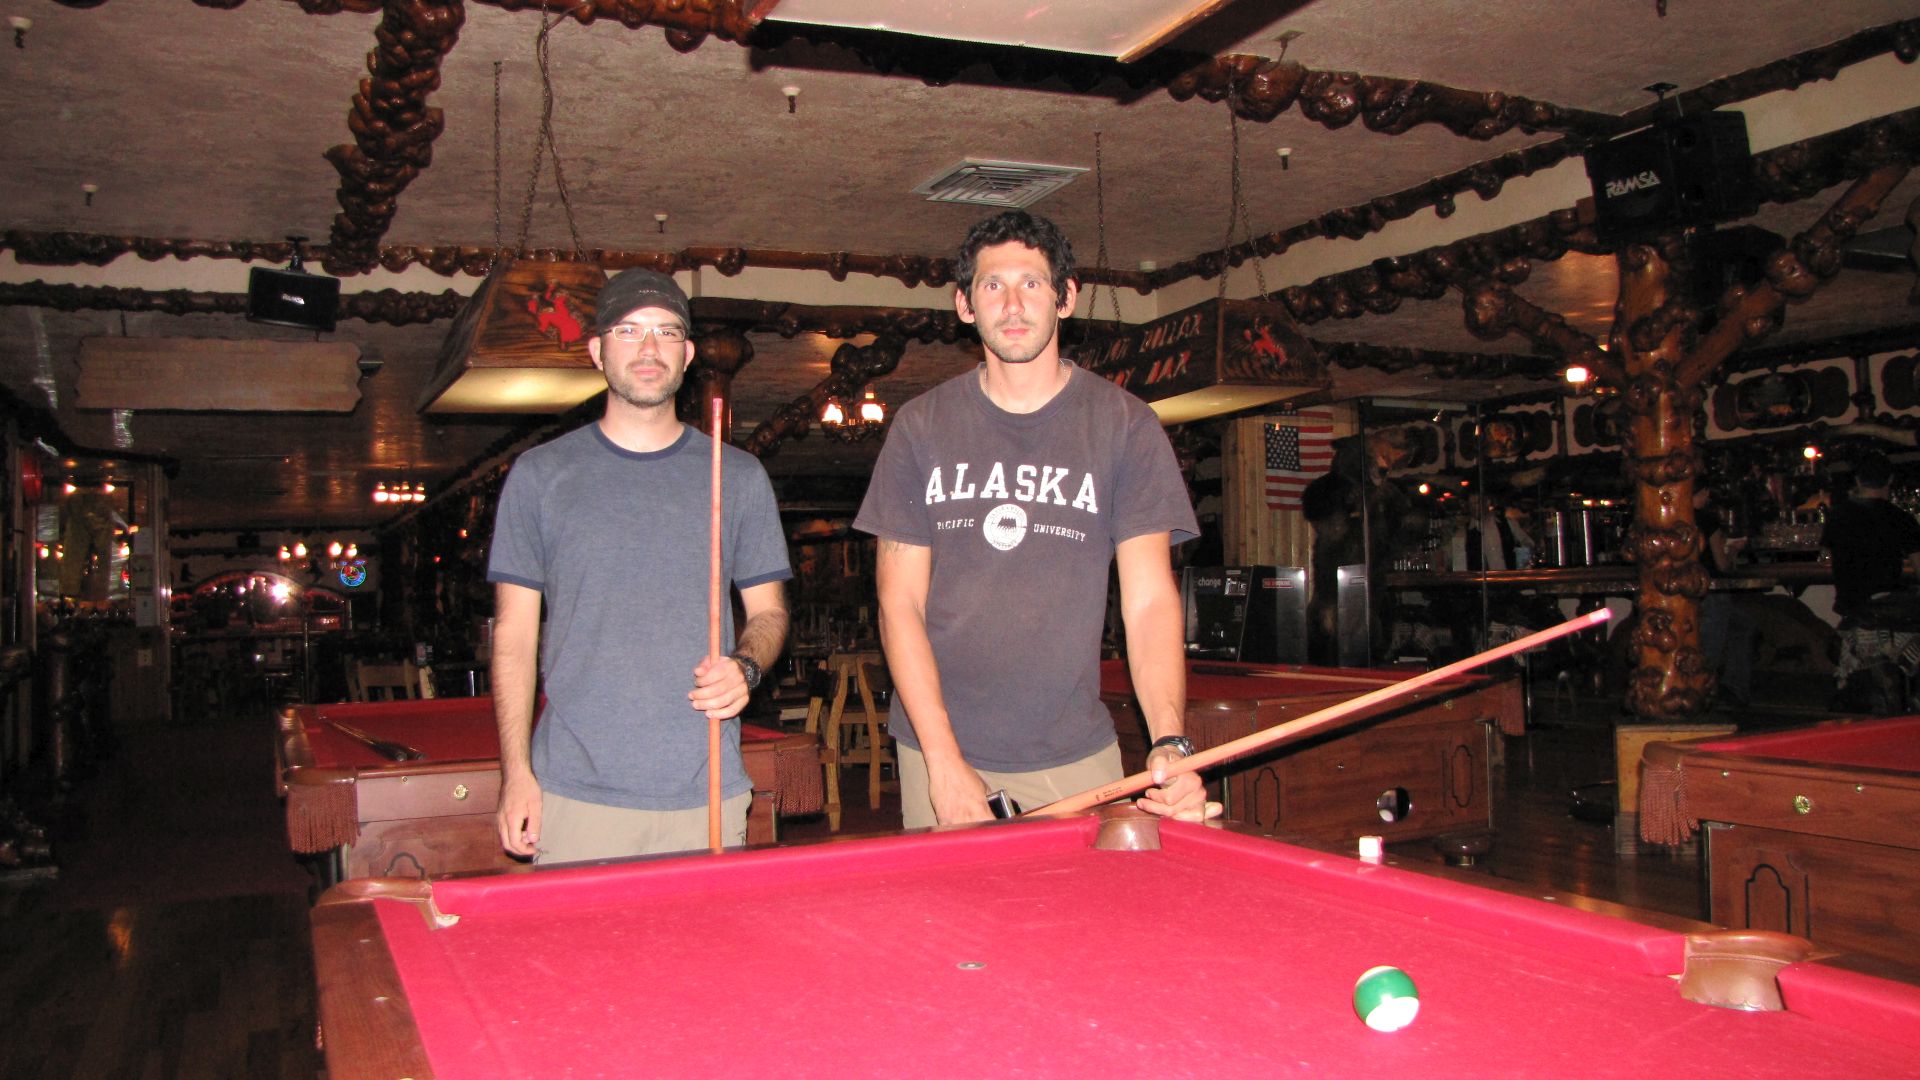 Jackson, WY, USA - John & Justin in the "Million Dollar Cowboy Bar" getting ready for the serious business of "no money changed hands Sheriff" pool ;)